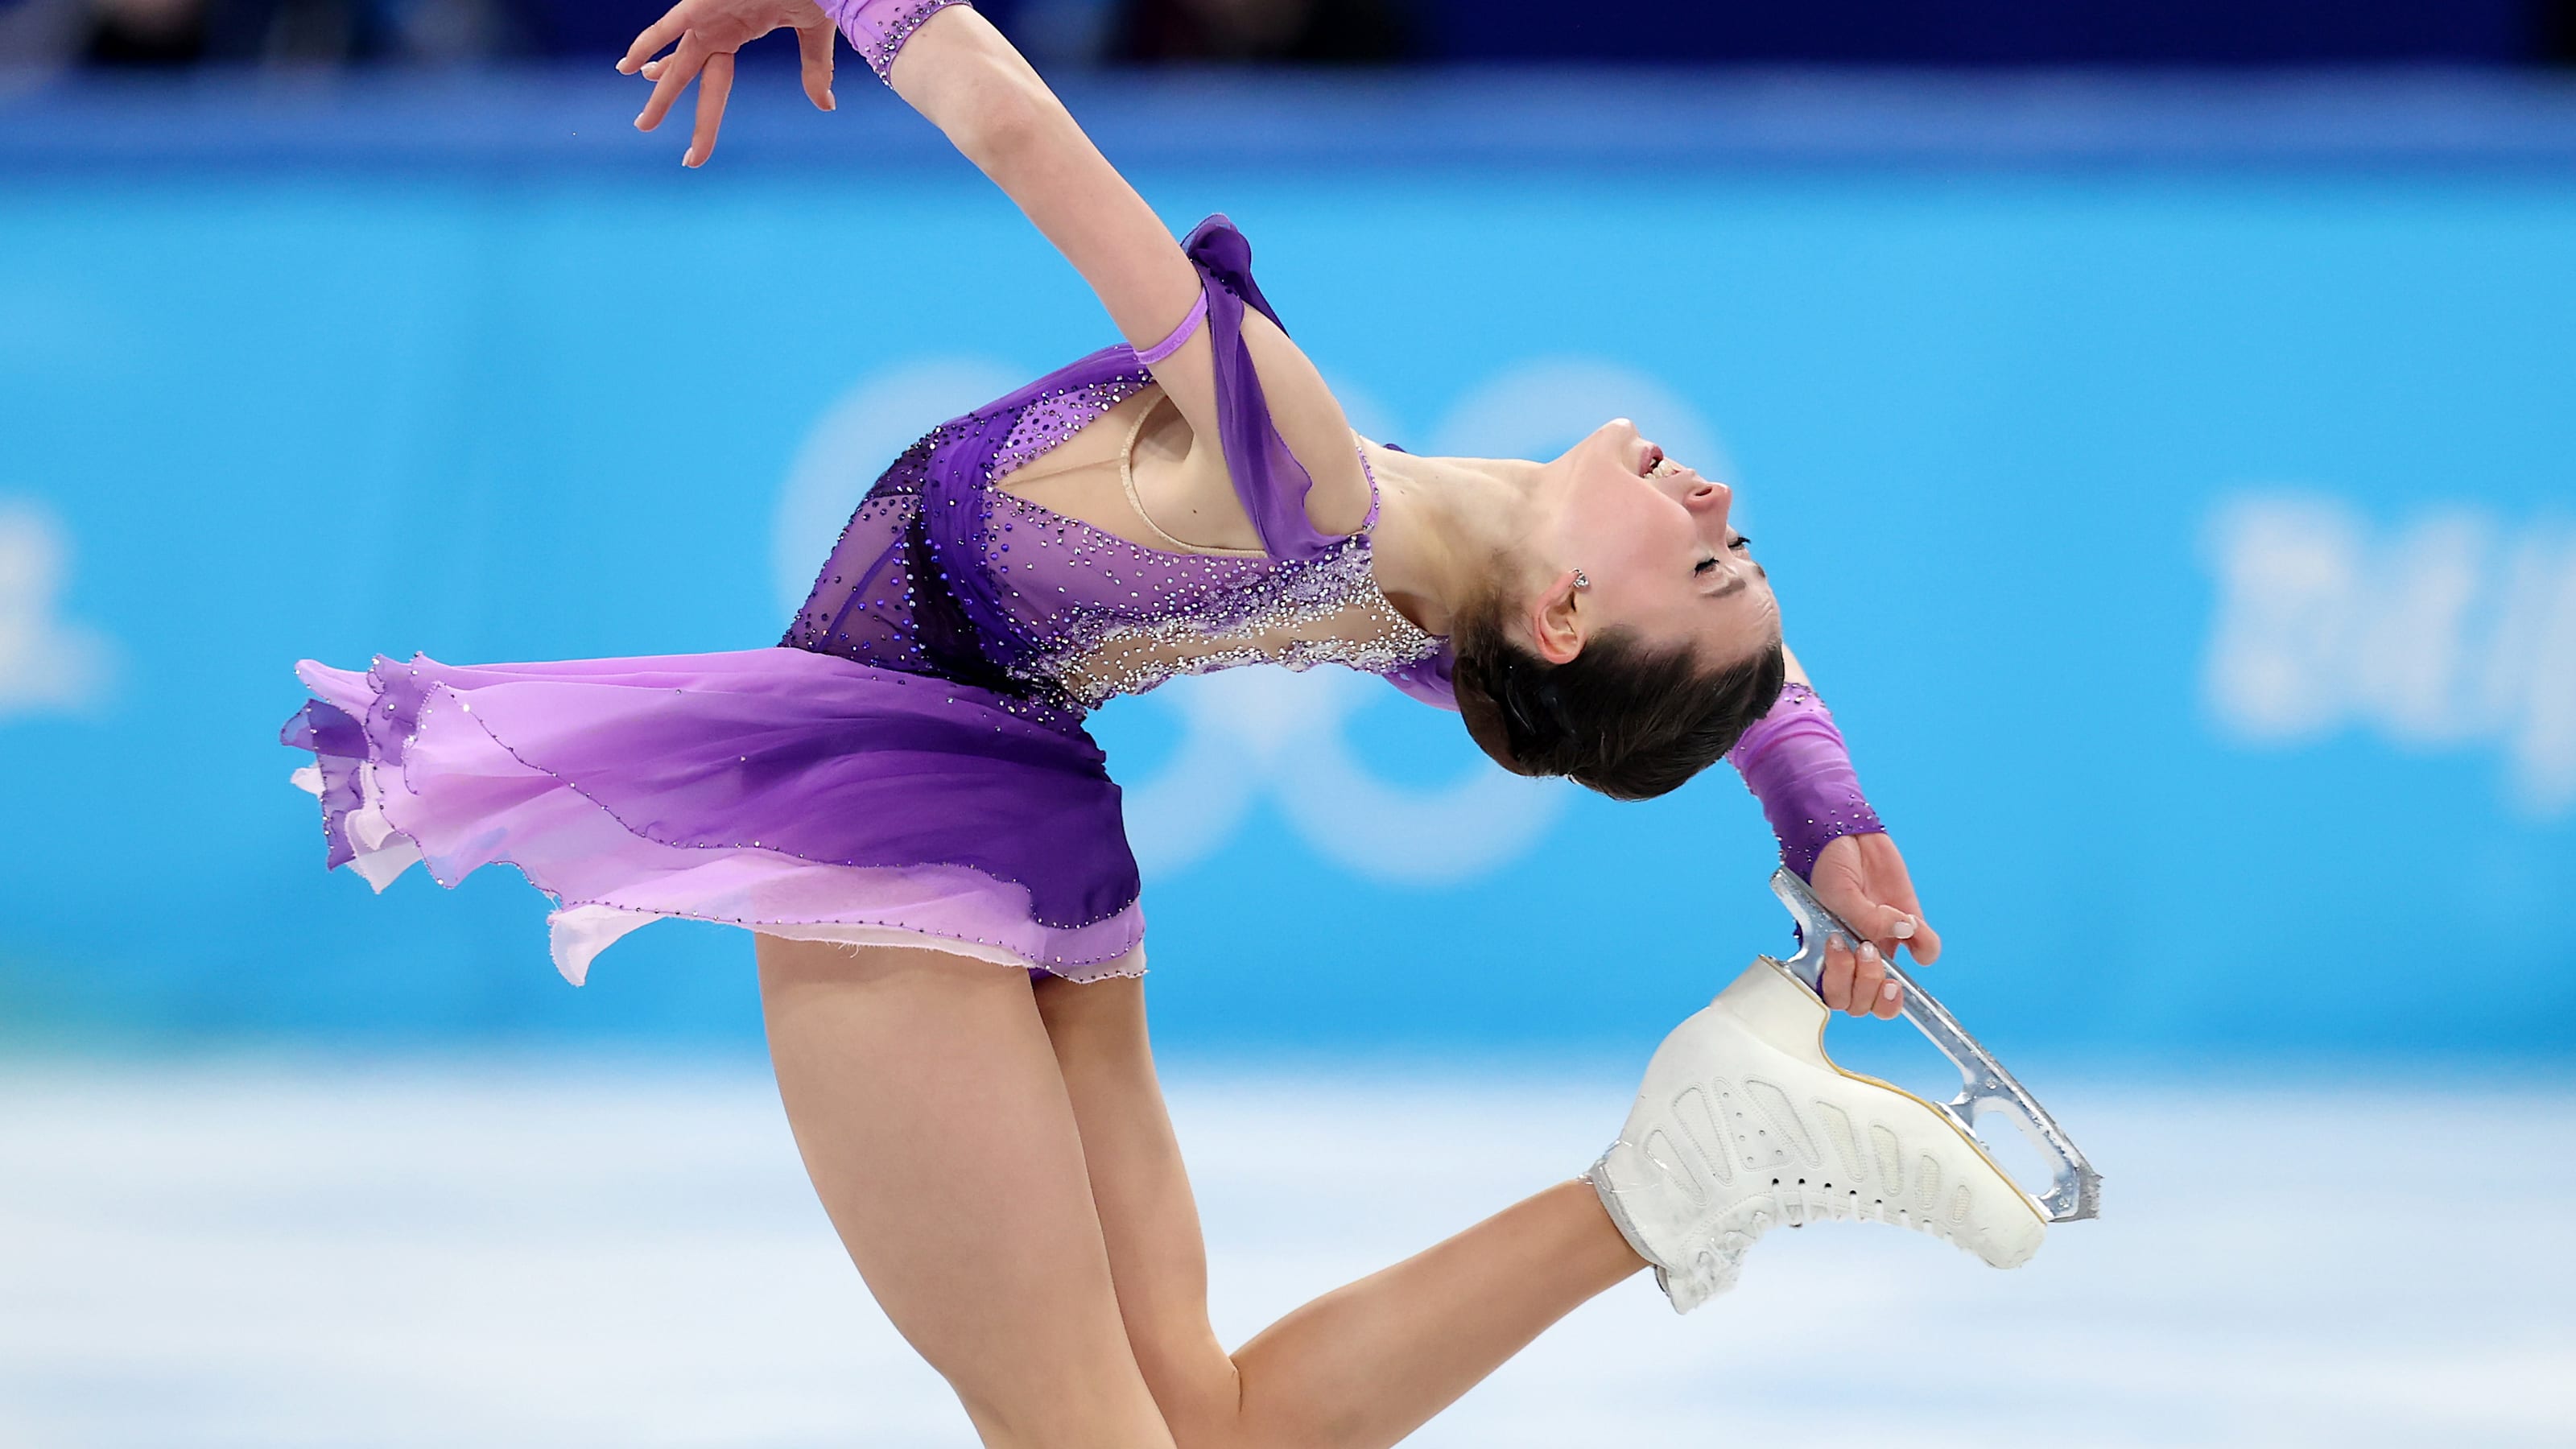 Ice Skating Schedule 2022 Figure Skating At Beijing 2022: Full Schedule Of Olympic Winter Games  Competition And Where To Watch